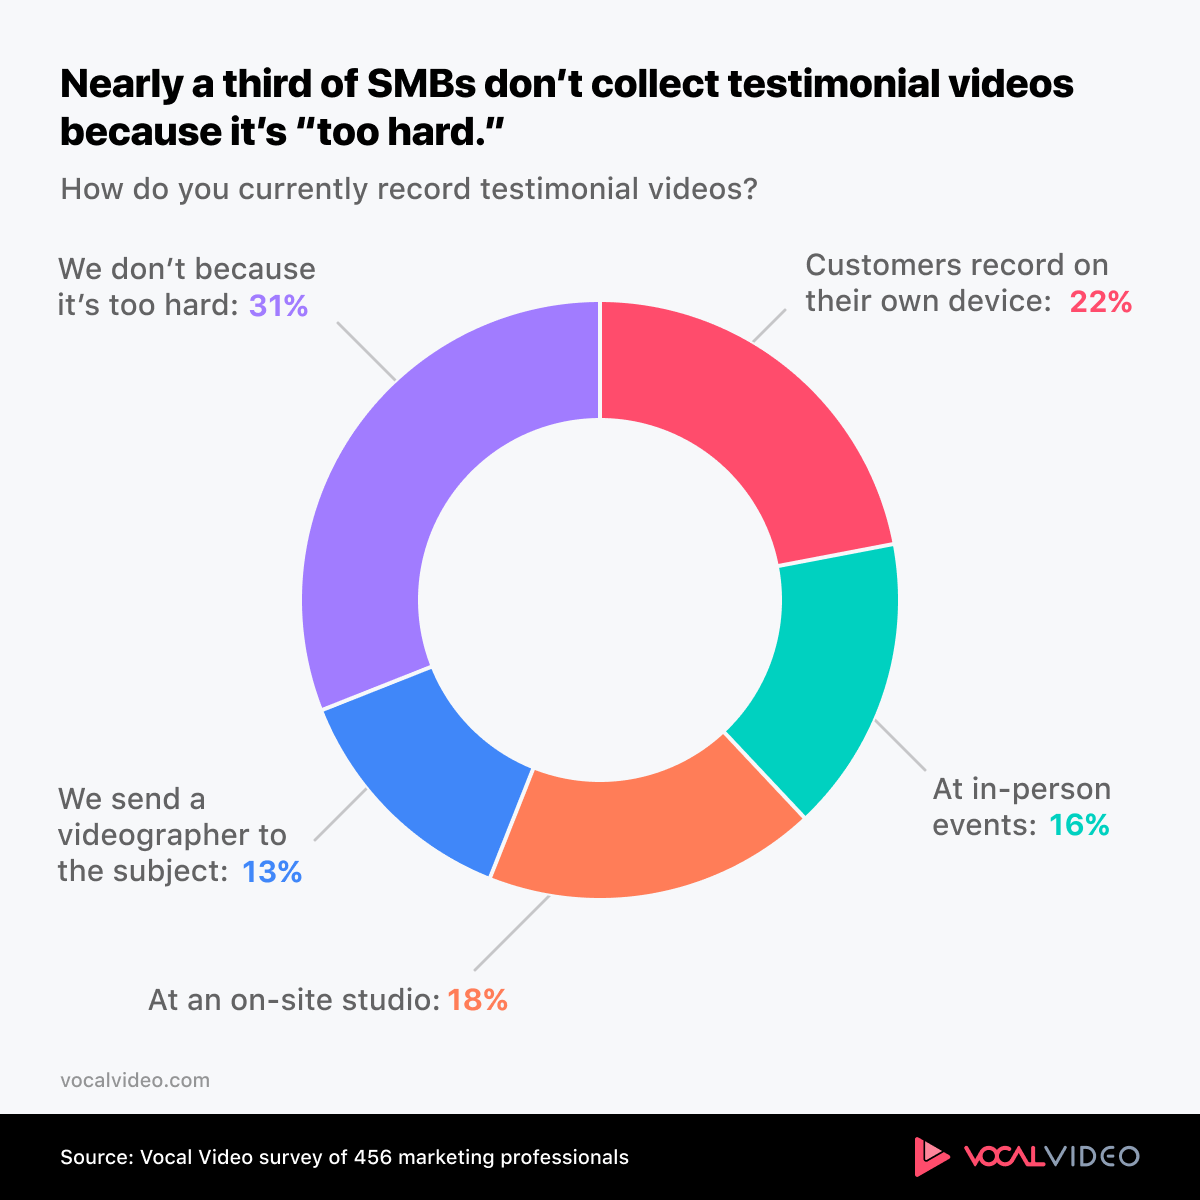 Chart showing that nearly 1/3 SMB doesn't produce testimonial videos because they're "too hard"